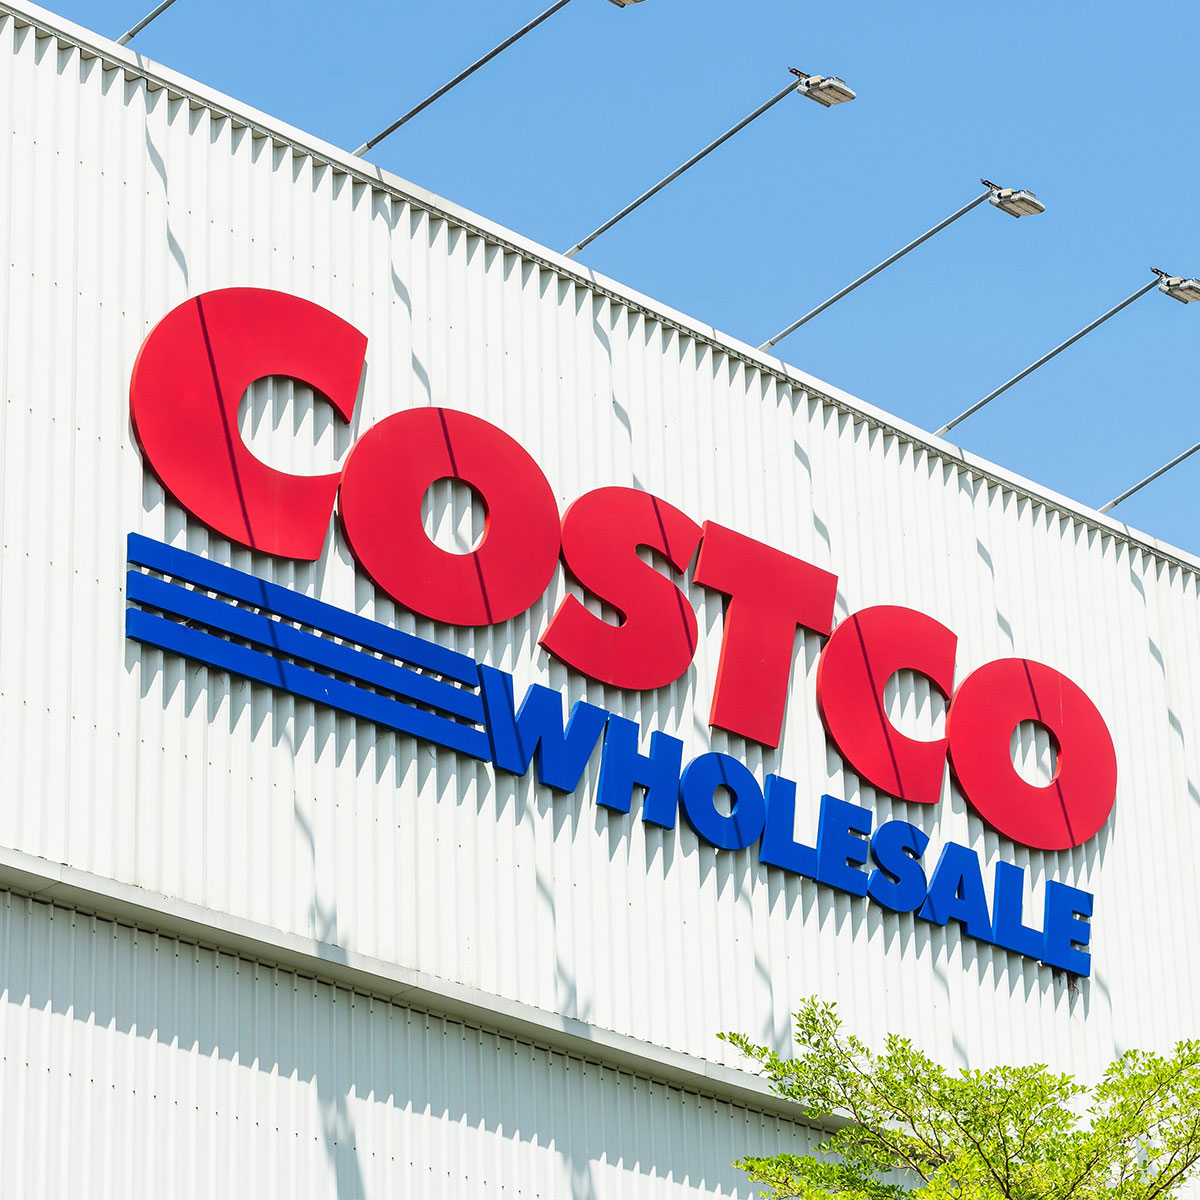 costco sign outdoors department store facade